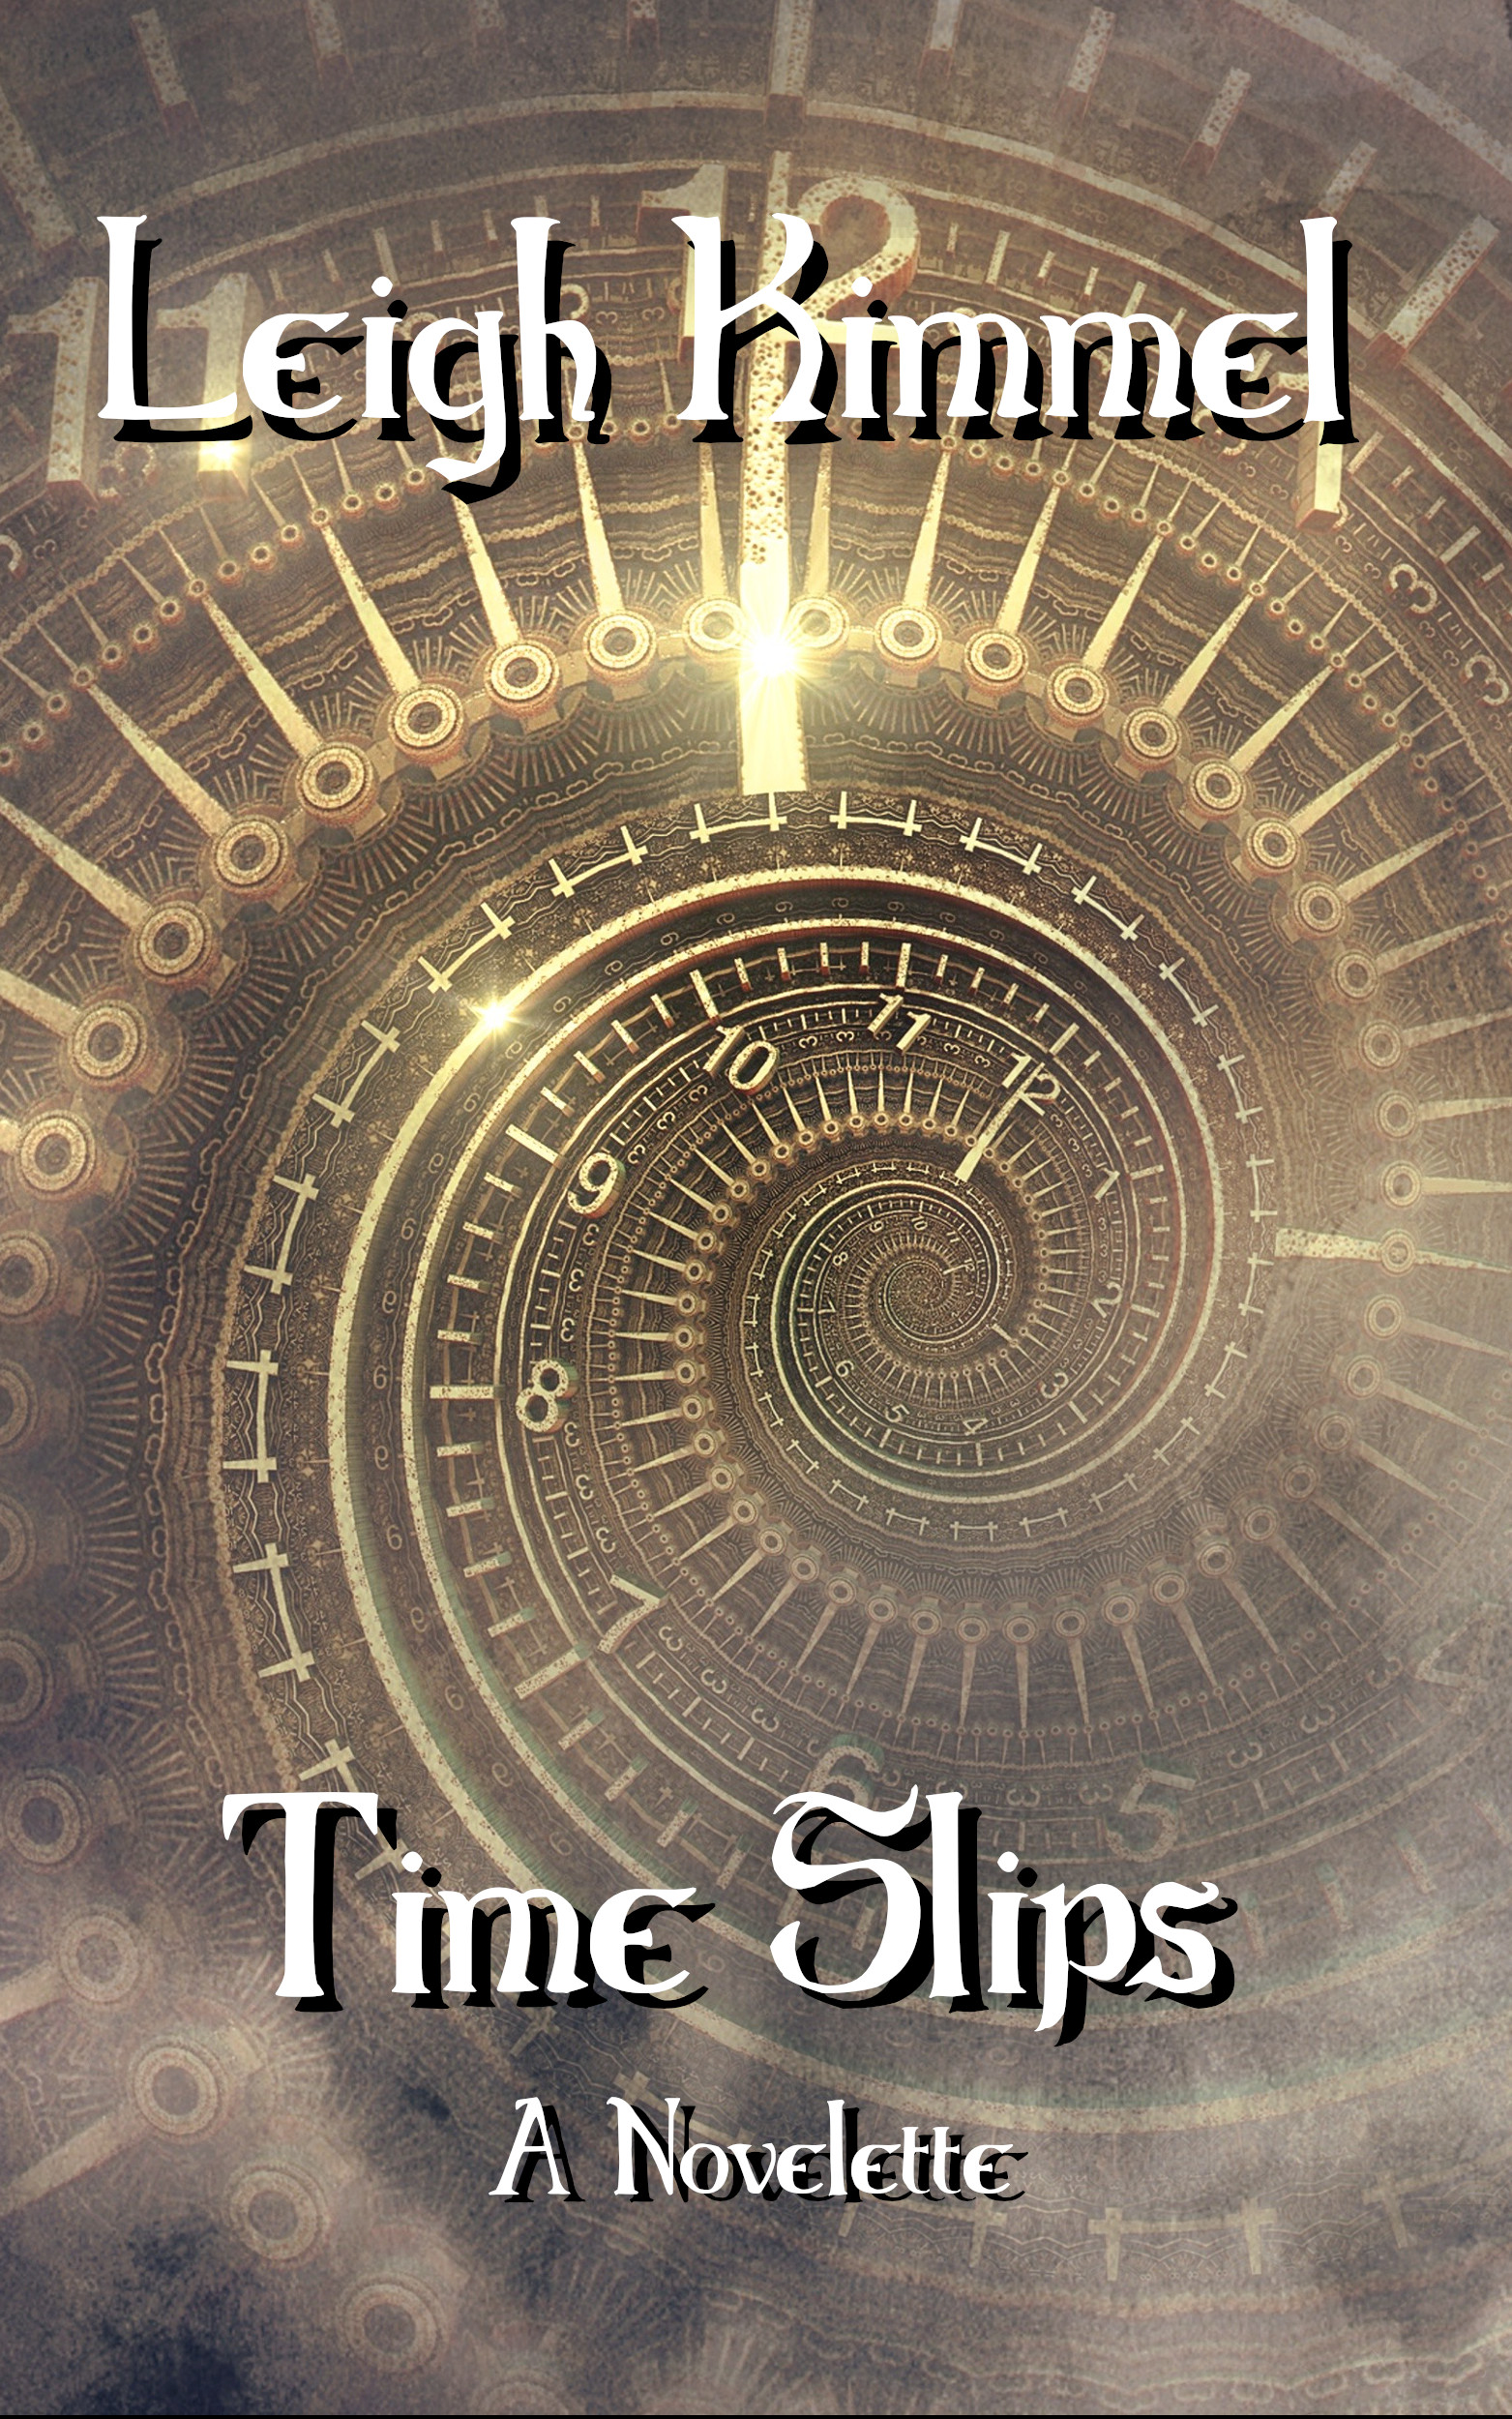 Guest Post: Time and the Spacefarer